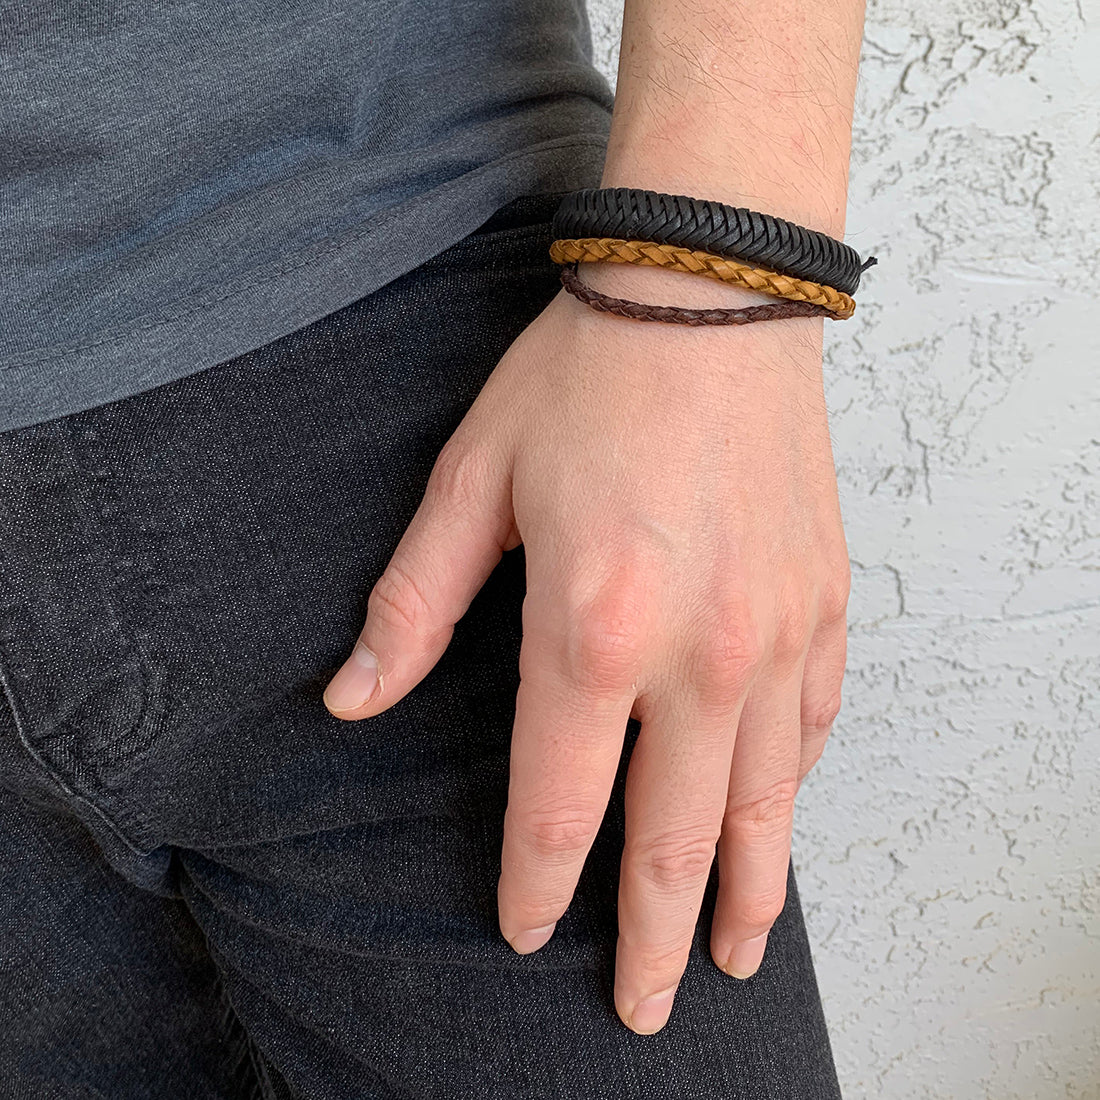 braided leather bracelet on a person's wrist.